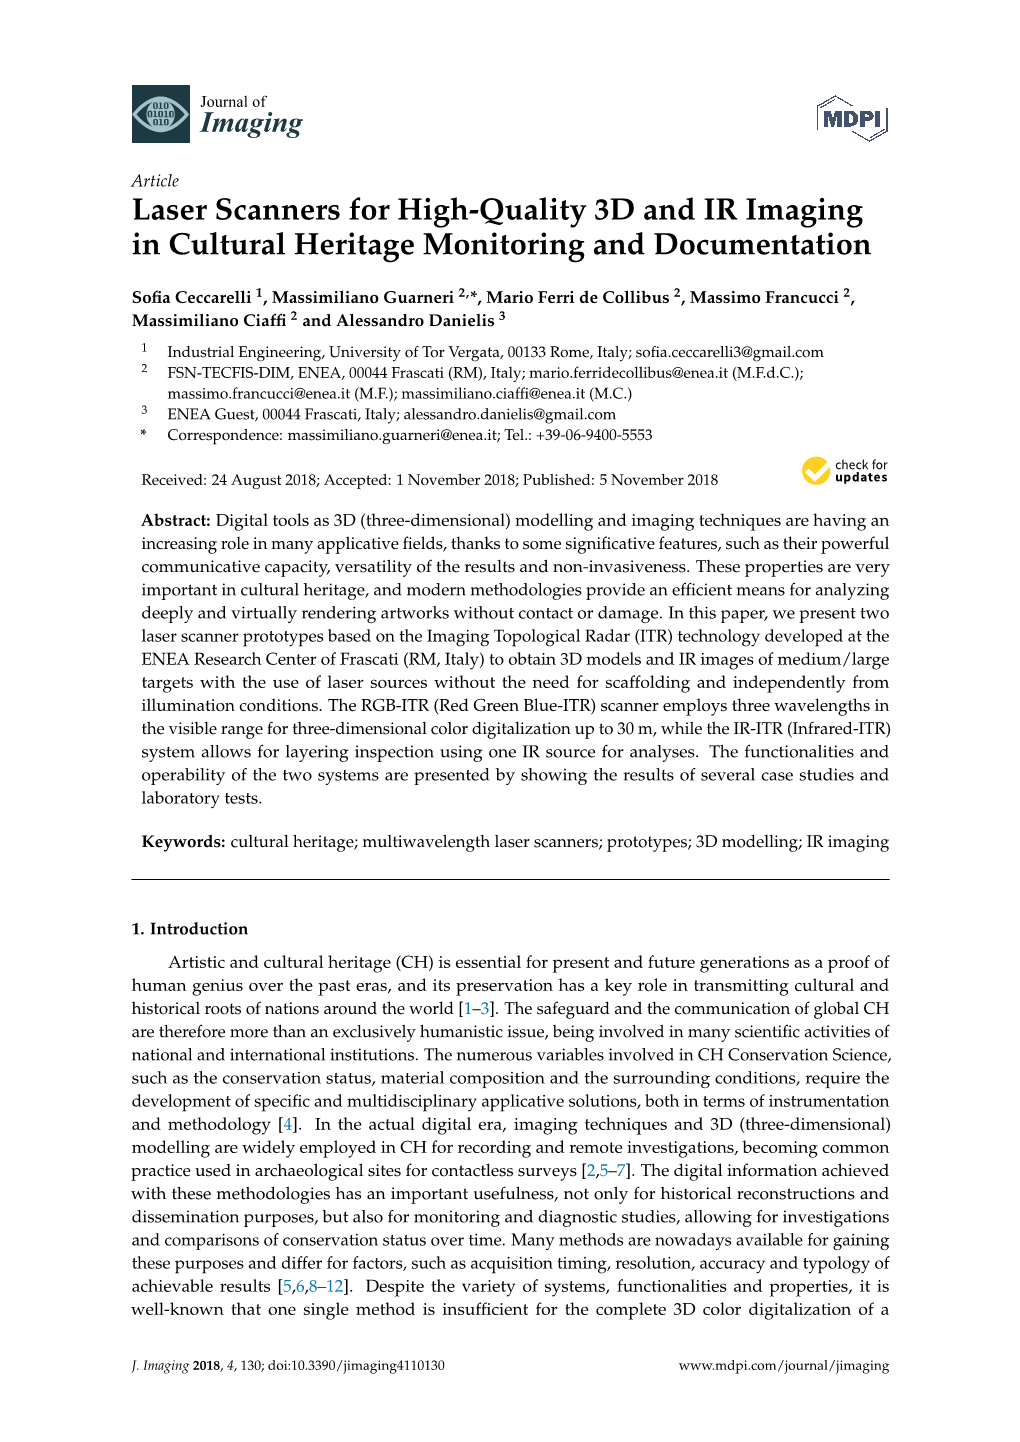 Laser Scanners for High-Quality 3D and IR Imaging in Cultural Heritage Monitoring and Documentation